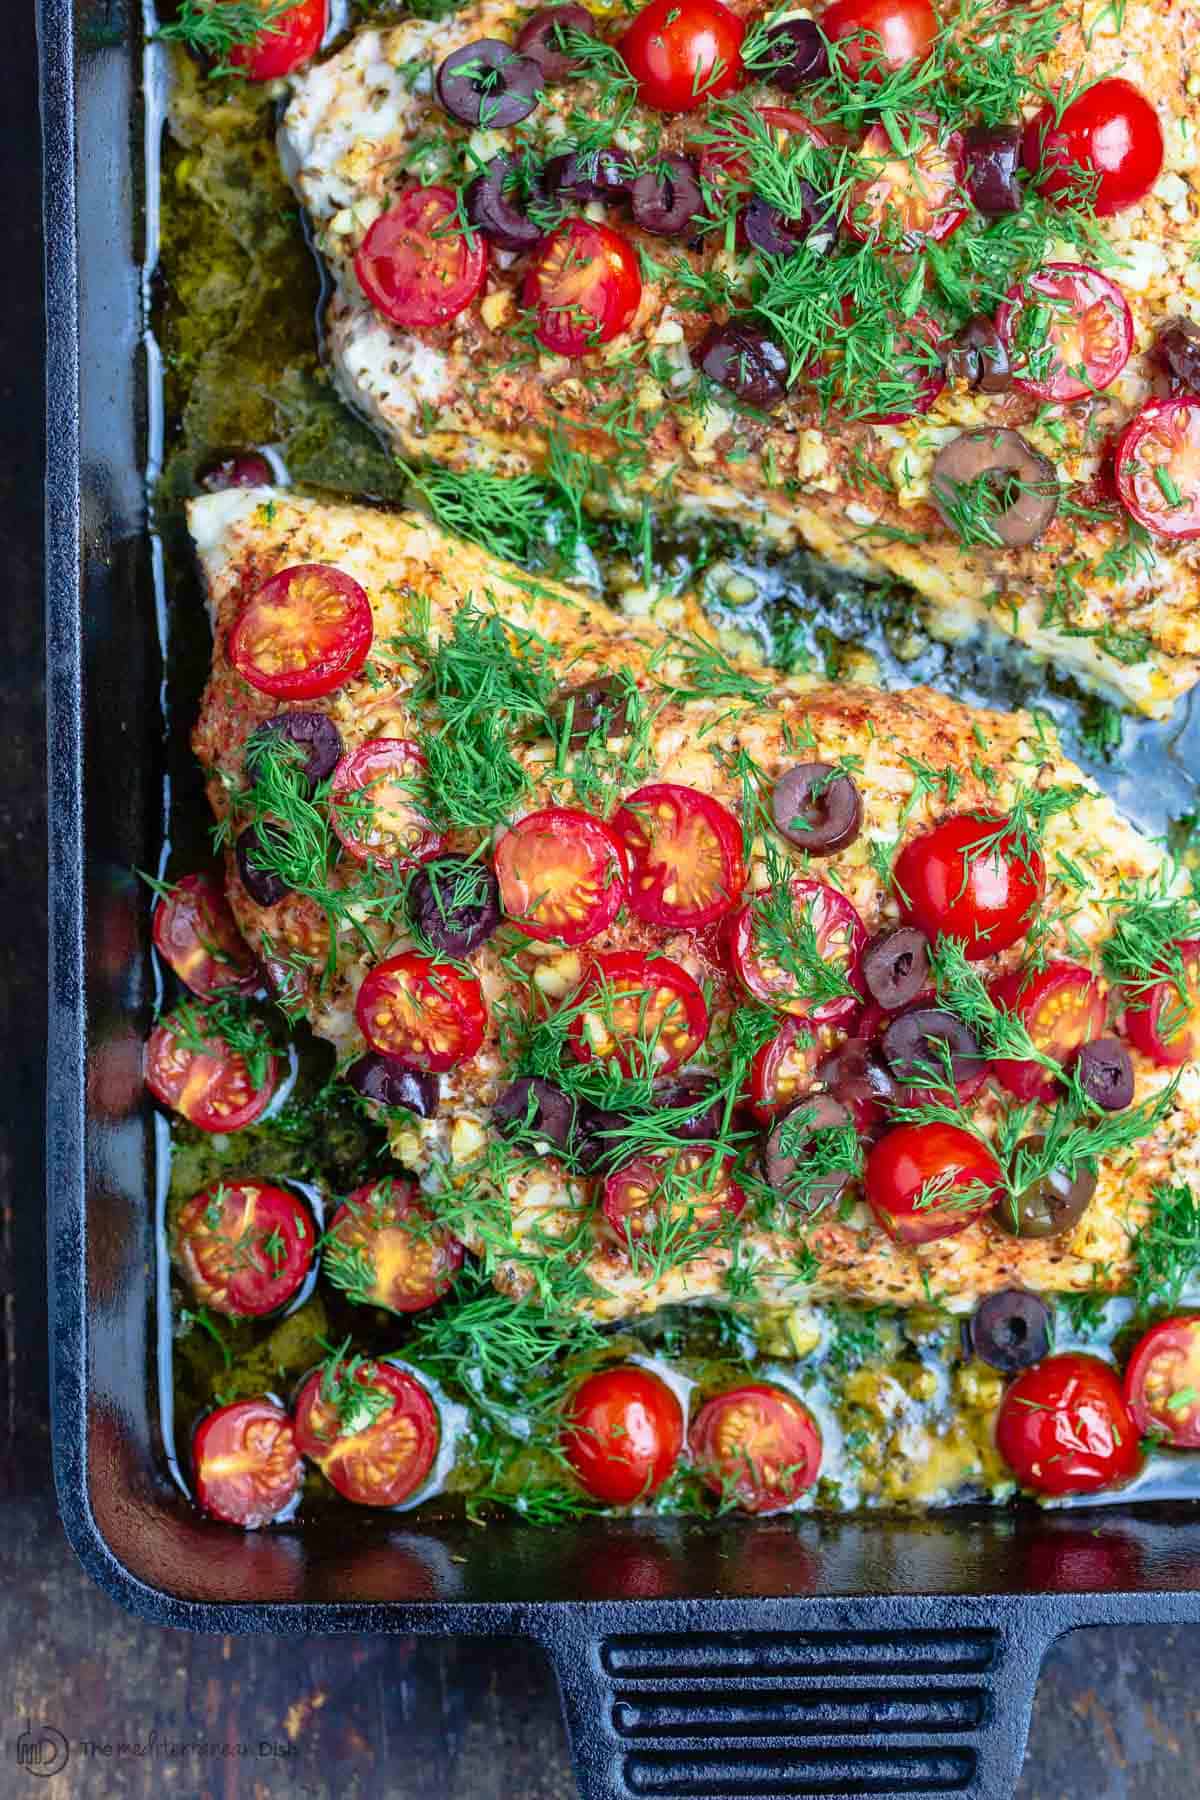 Mediterranean style baked grouper recipe with tomatoes and olives 